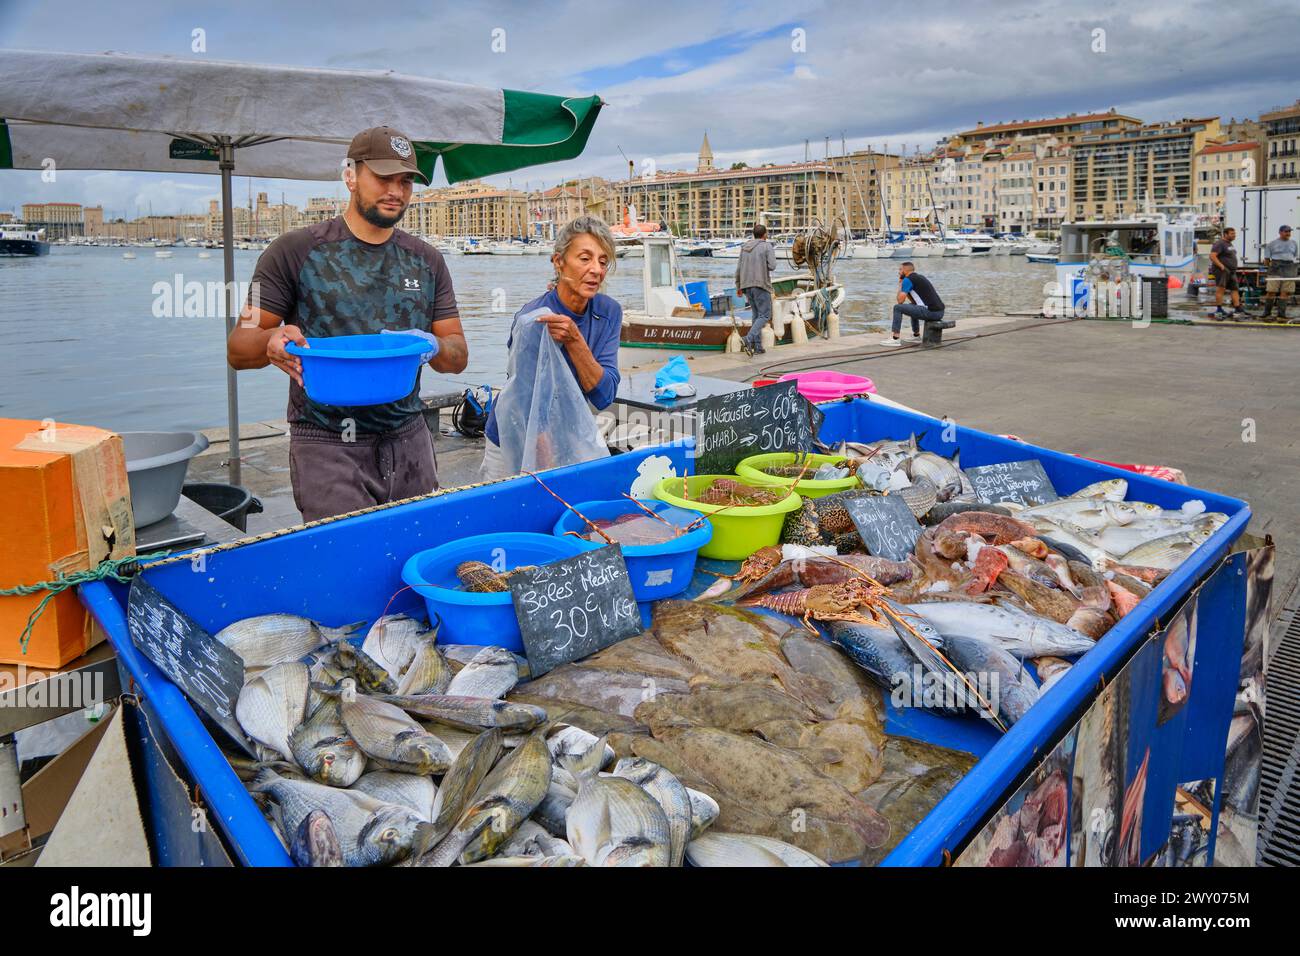 Fish market (Marché aux Poissons) at the Old Port (Vieux Port) in the city center by the Mediterranean Sea. Marseille, France Stock Photo